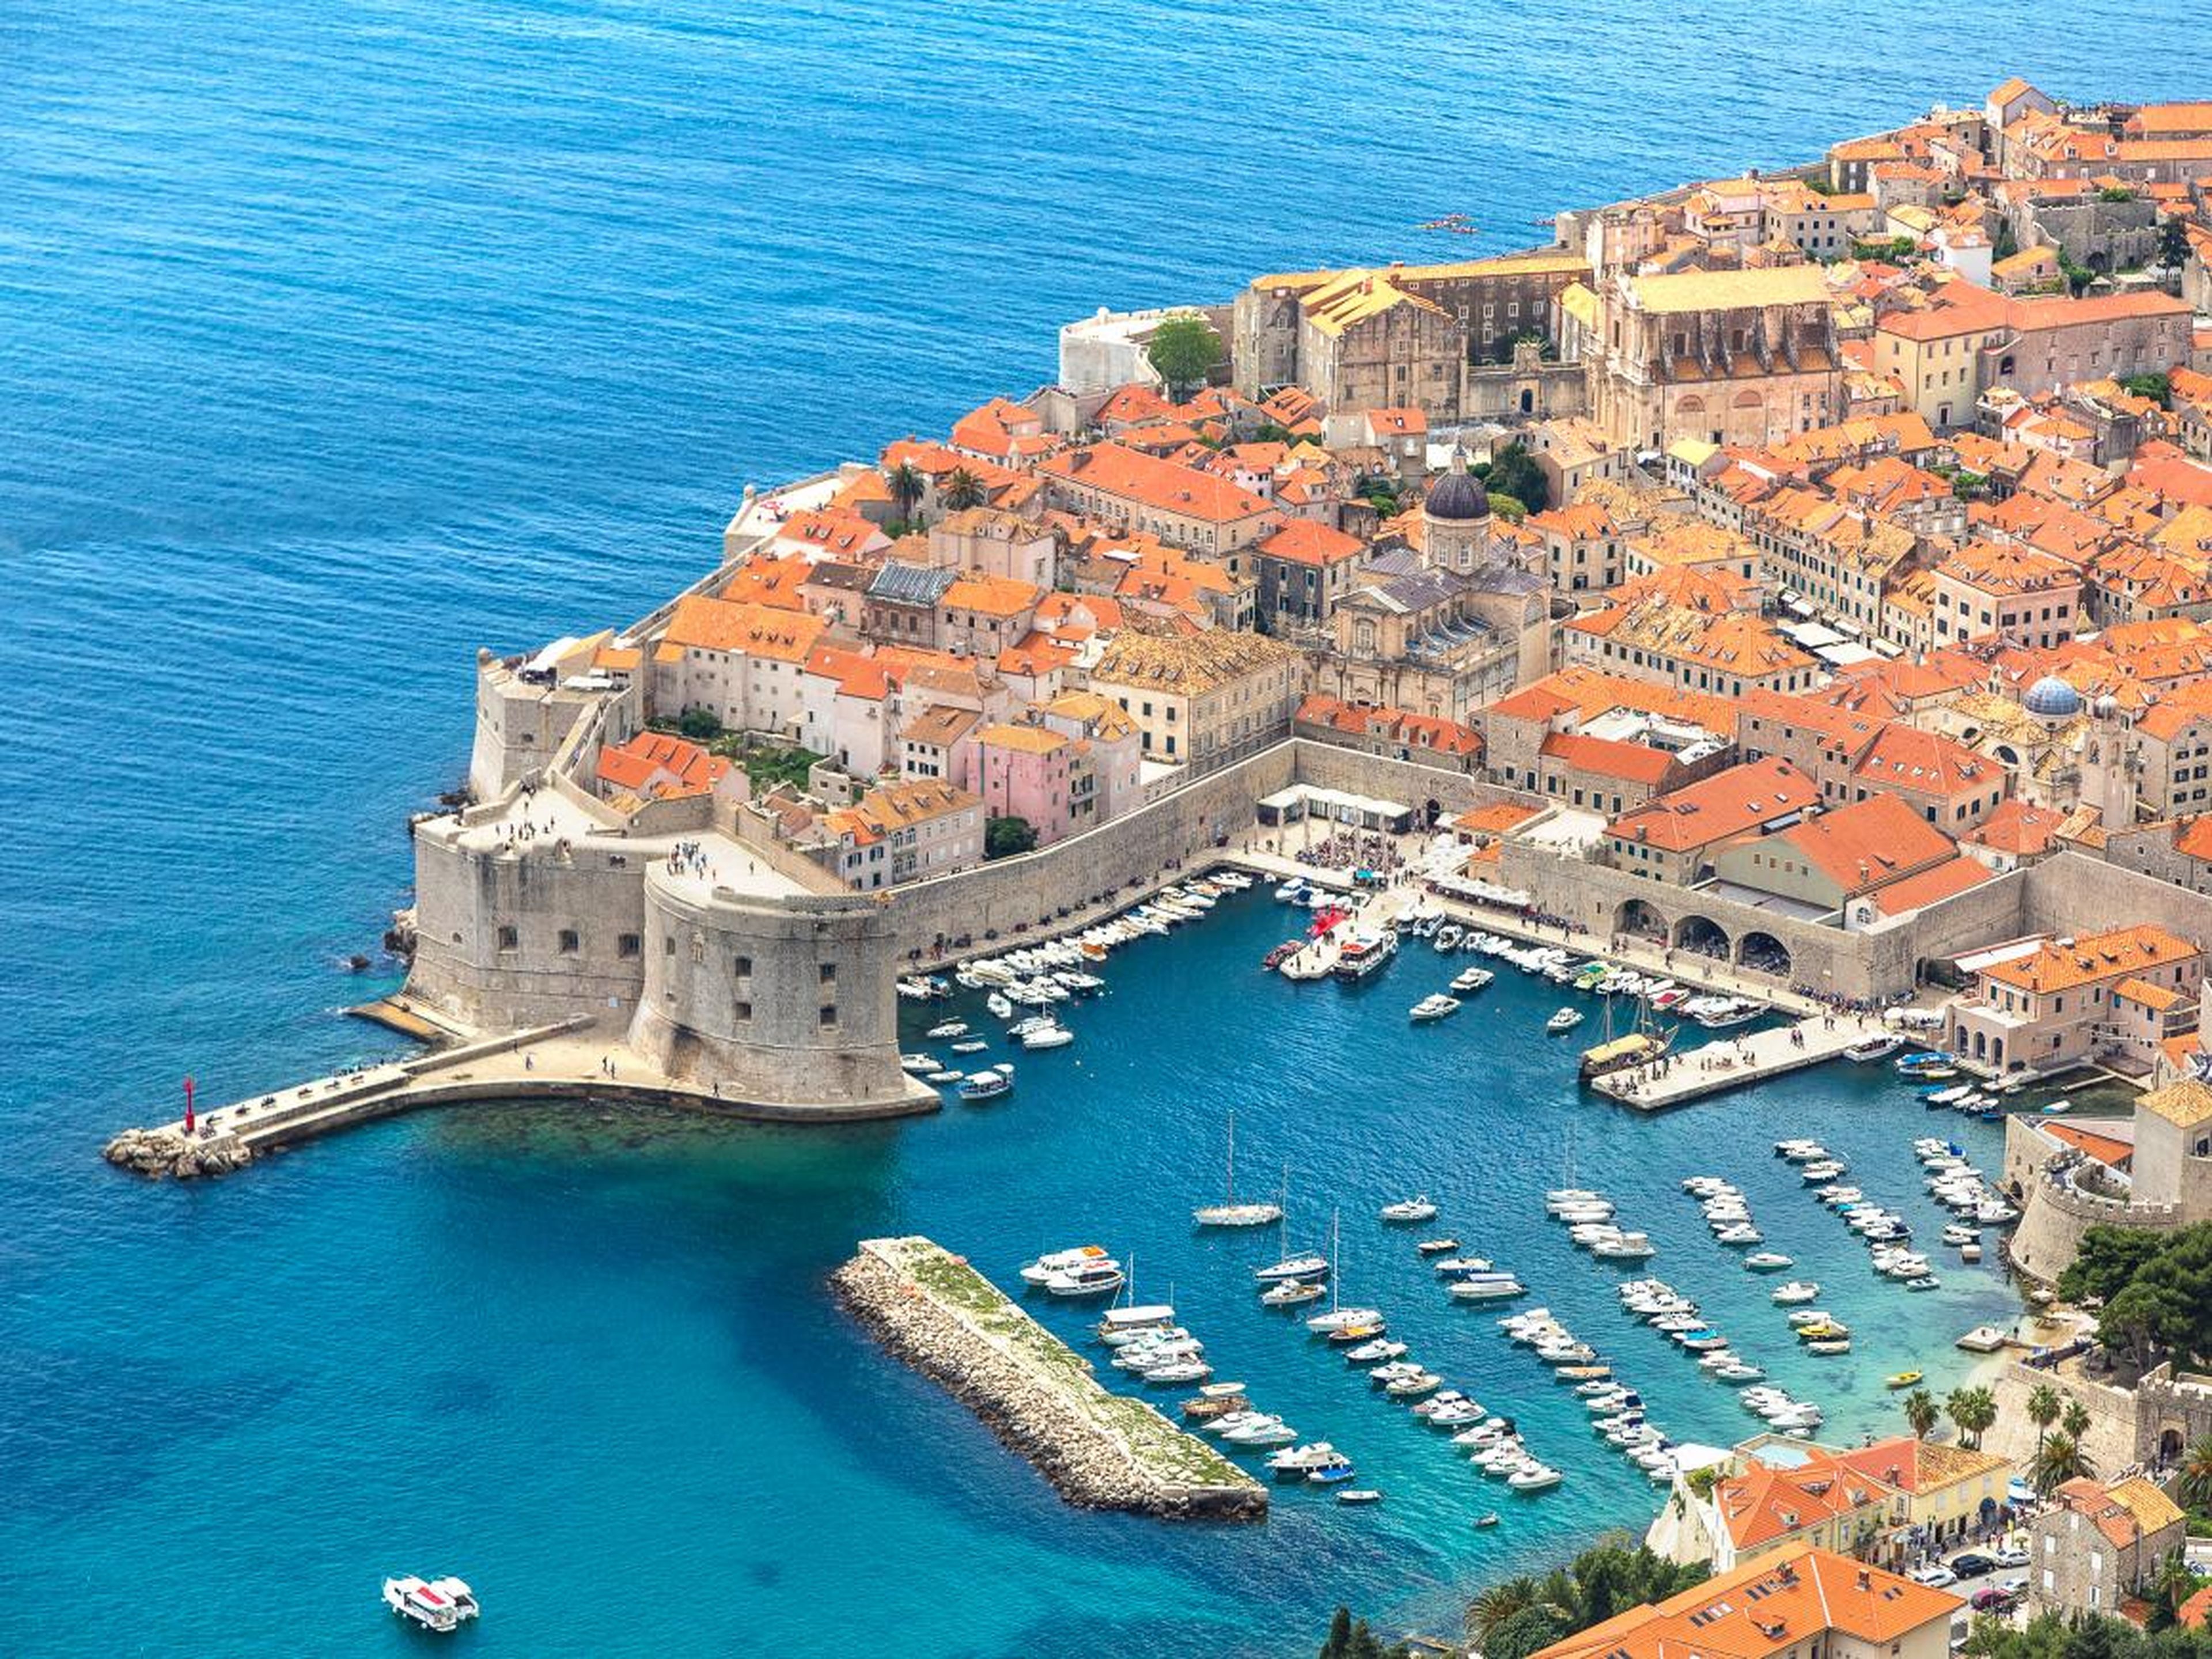 Dubrovnik, Croatia, has been struggling with overtourism largely because of its popularity with "Game of Thrones" fans.